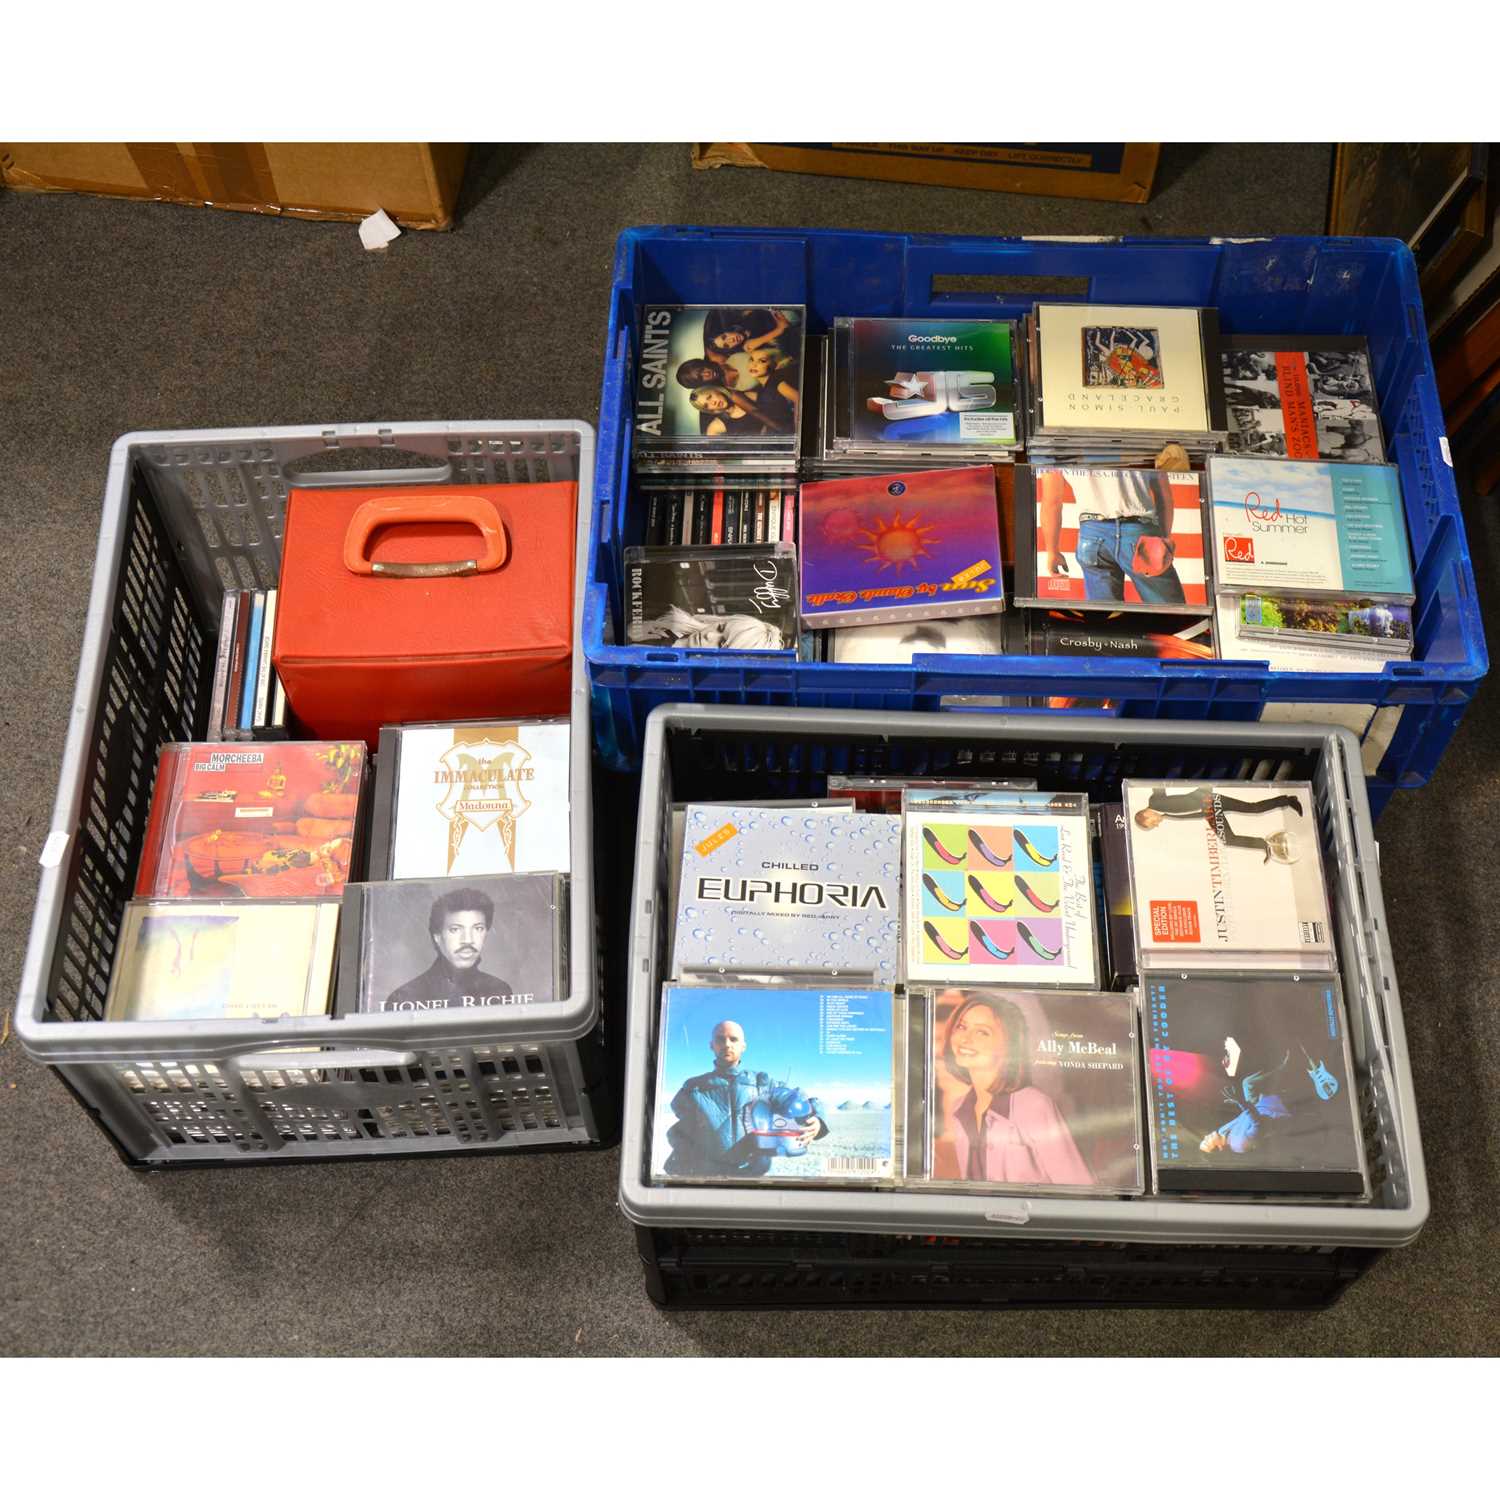 Lot 16 - Three boxes of music CDs, mostly pop, and a small case of 7" vinyl records